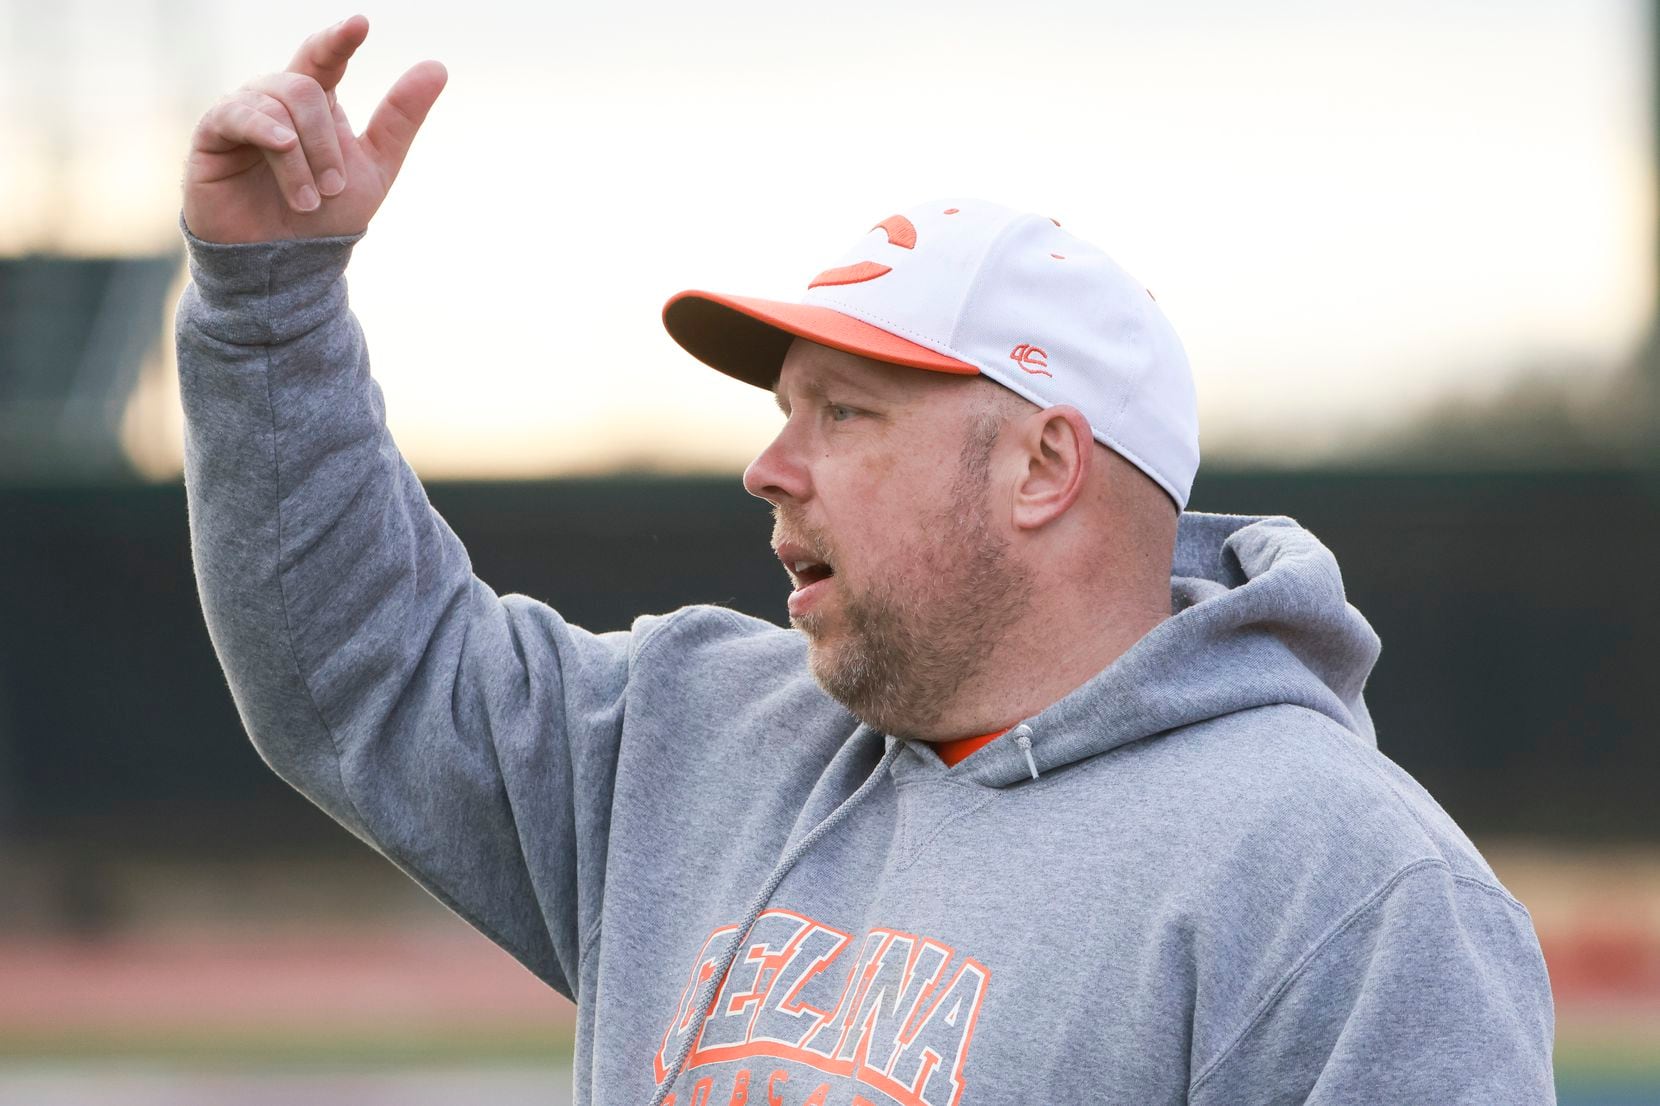 Celina High School’s head coach Alexander Adams coaches from the sidelines during the game...